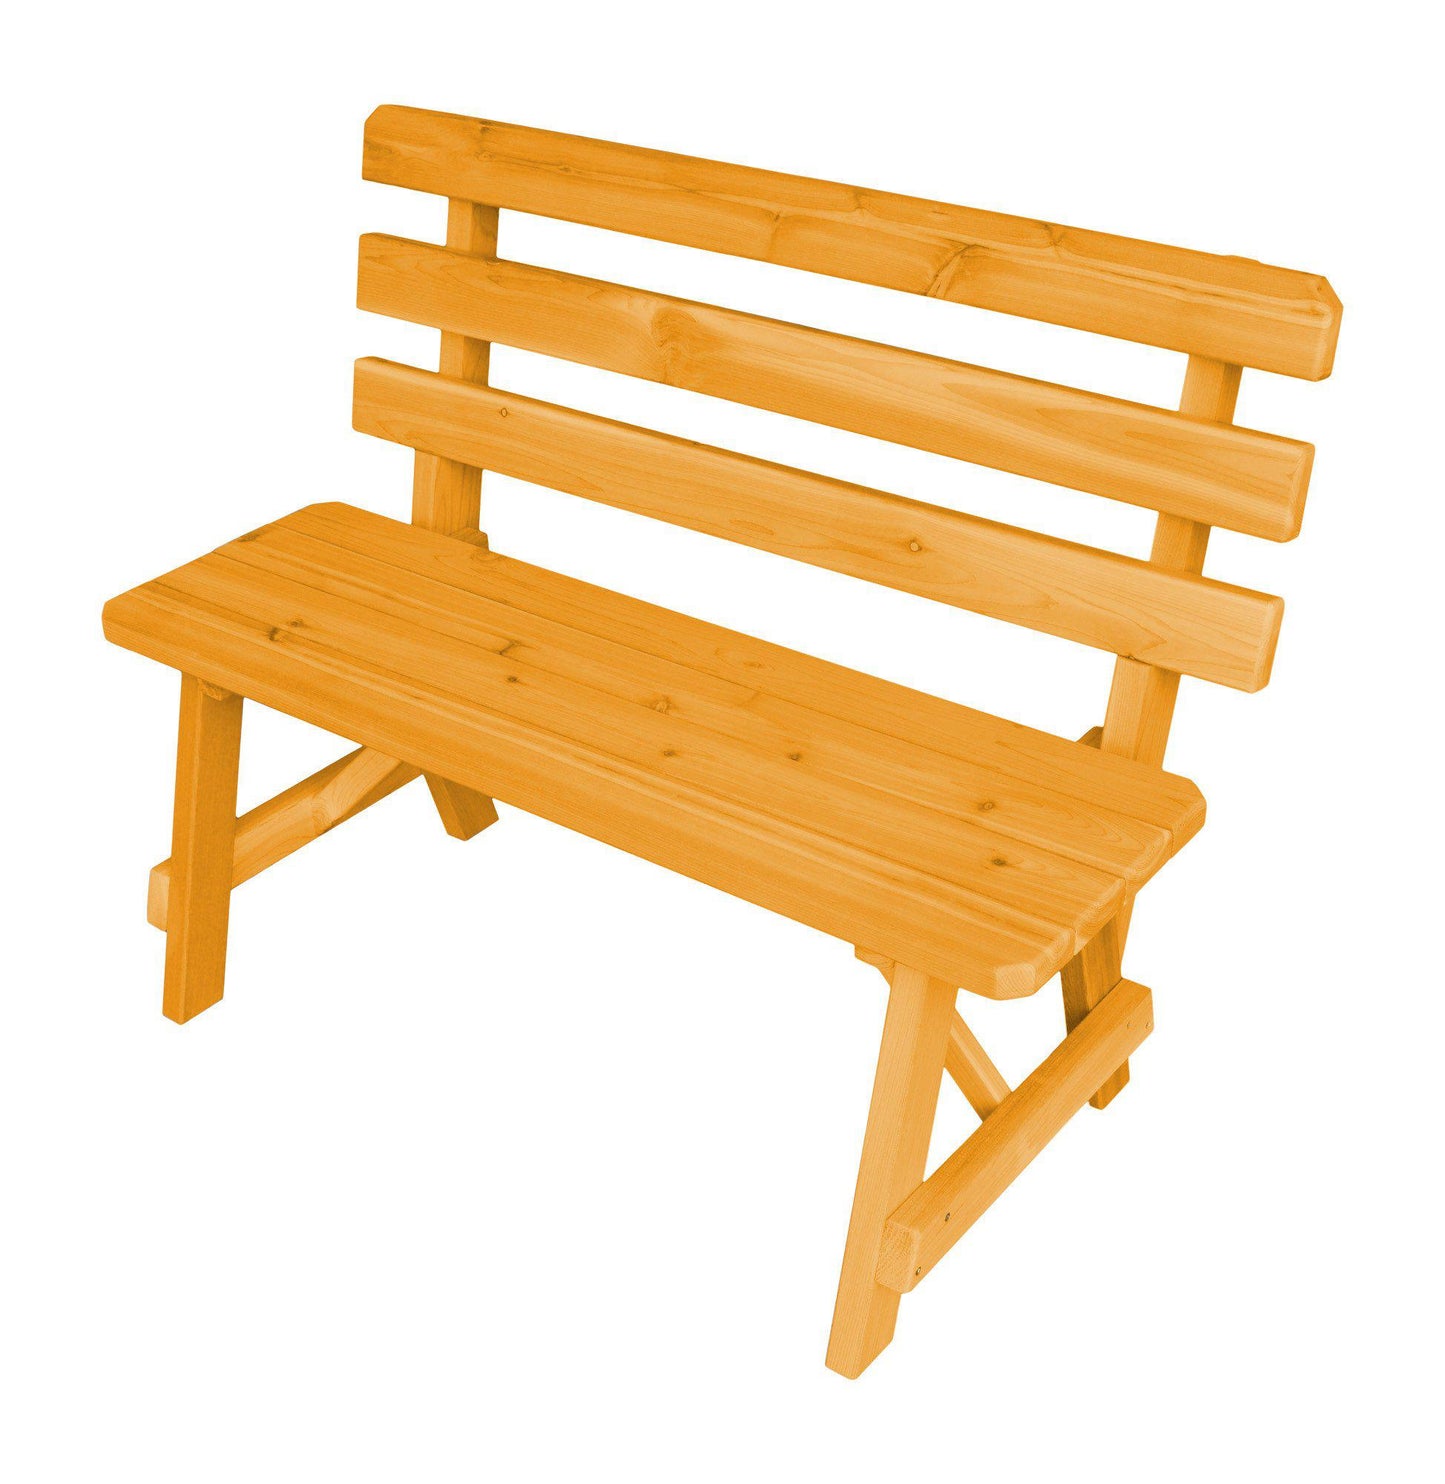 A&L FURNITURE CO. Western Red Cedar 44" Traditional Backed Bench Only - LEAD TIME TO SHIP 4 WEEKS OR LESS